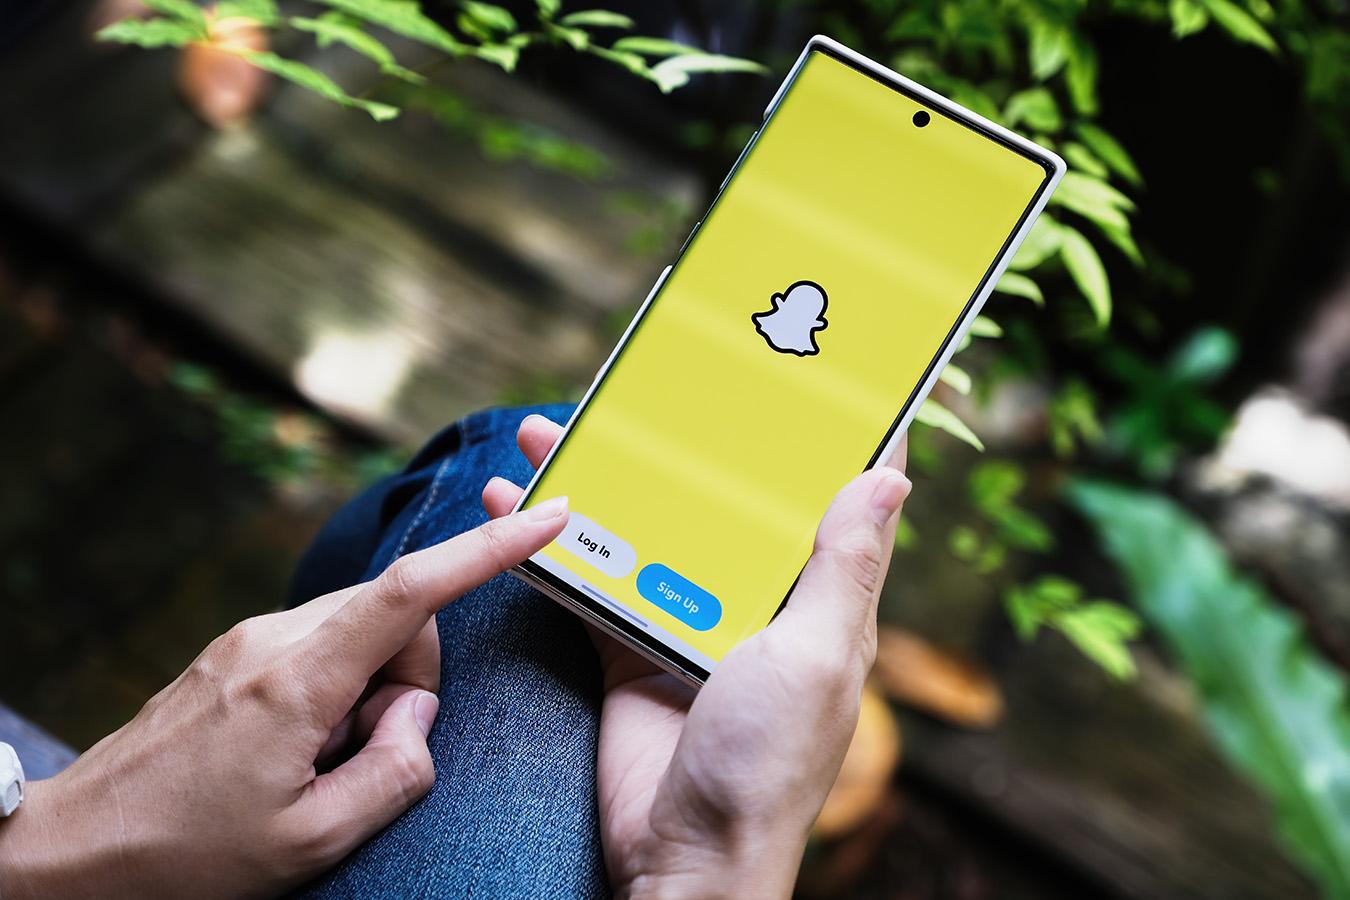 How does snapchat work? Man opening the snapchat app